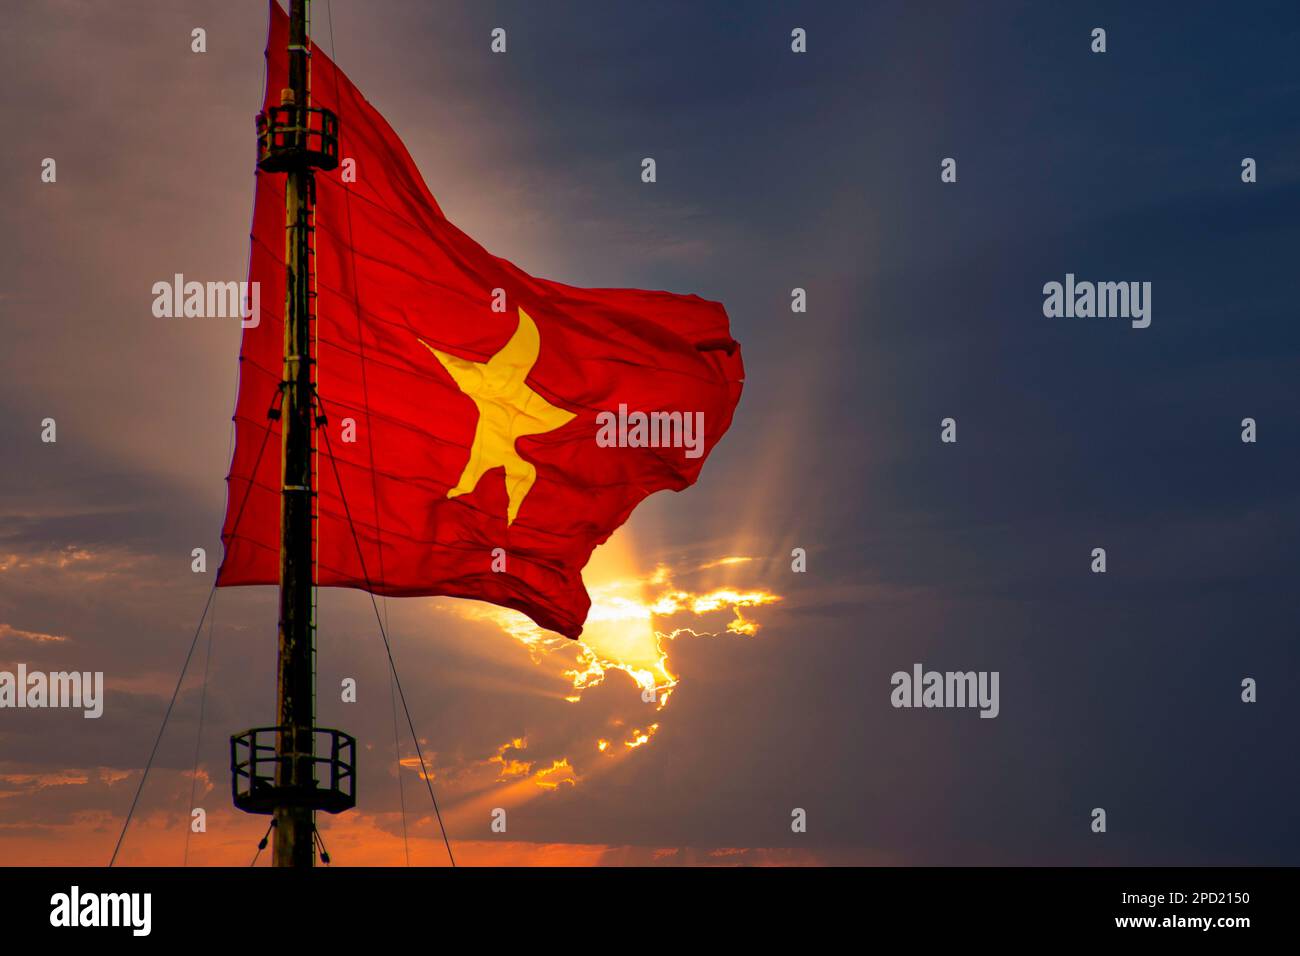 Red and Yellow Vietnamese flag proudly waving Stock Photo